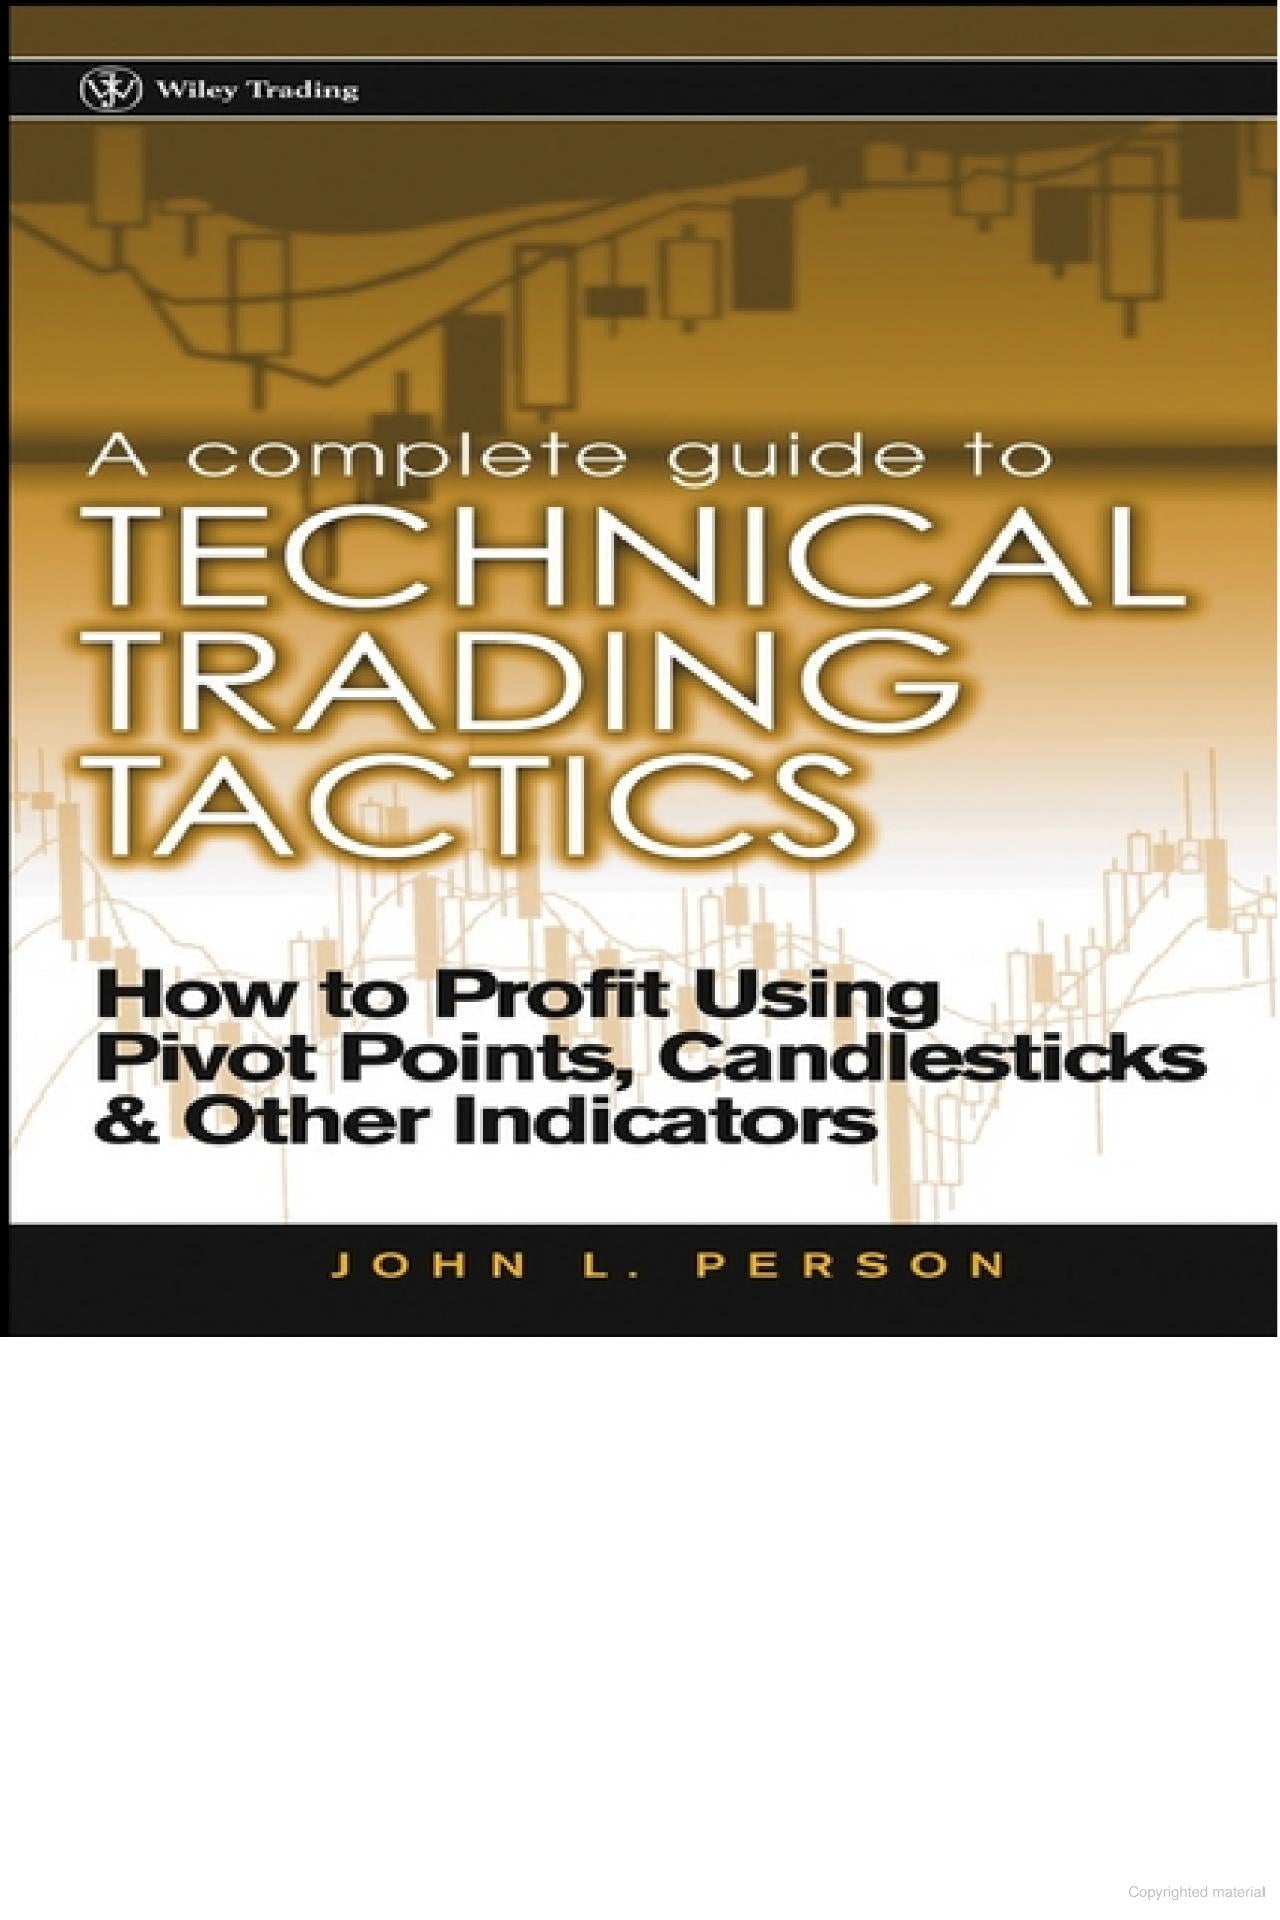 A complete guide on Technical Trading Tactics by John Person